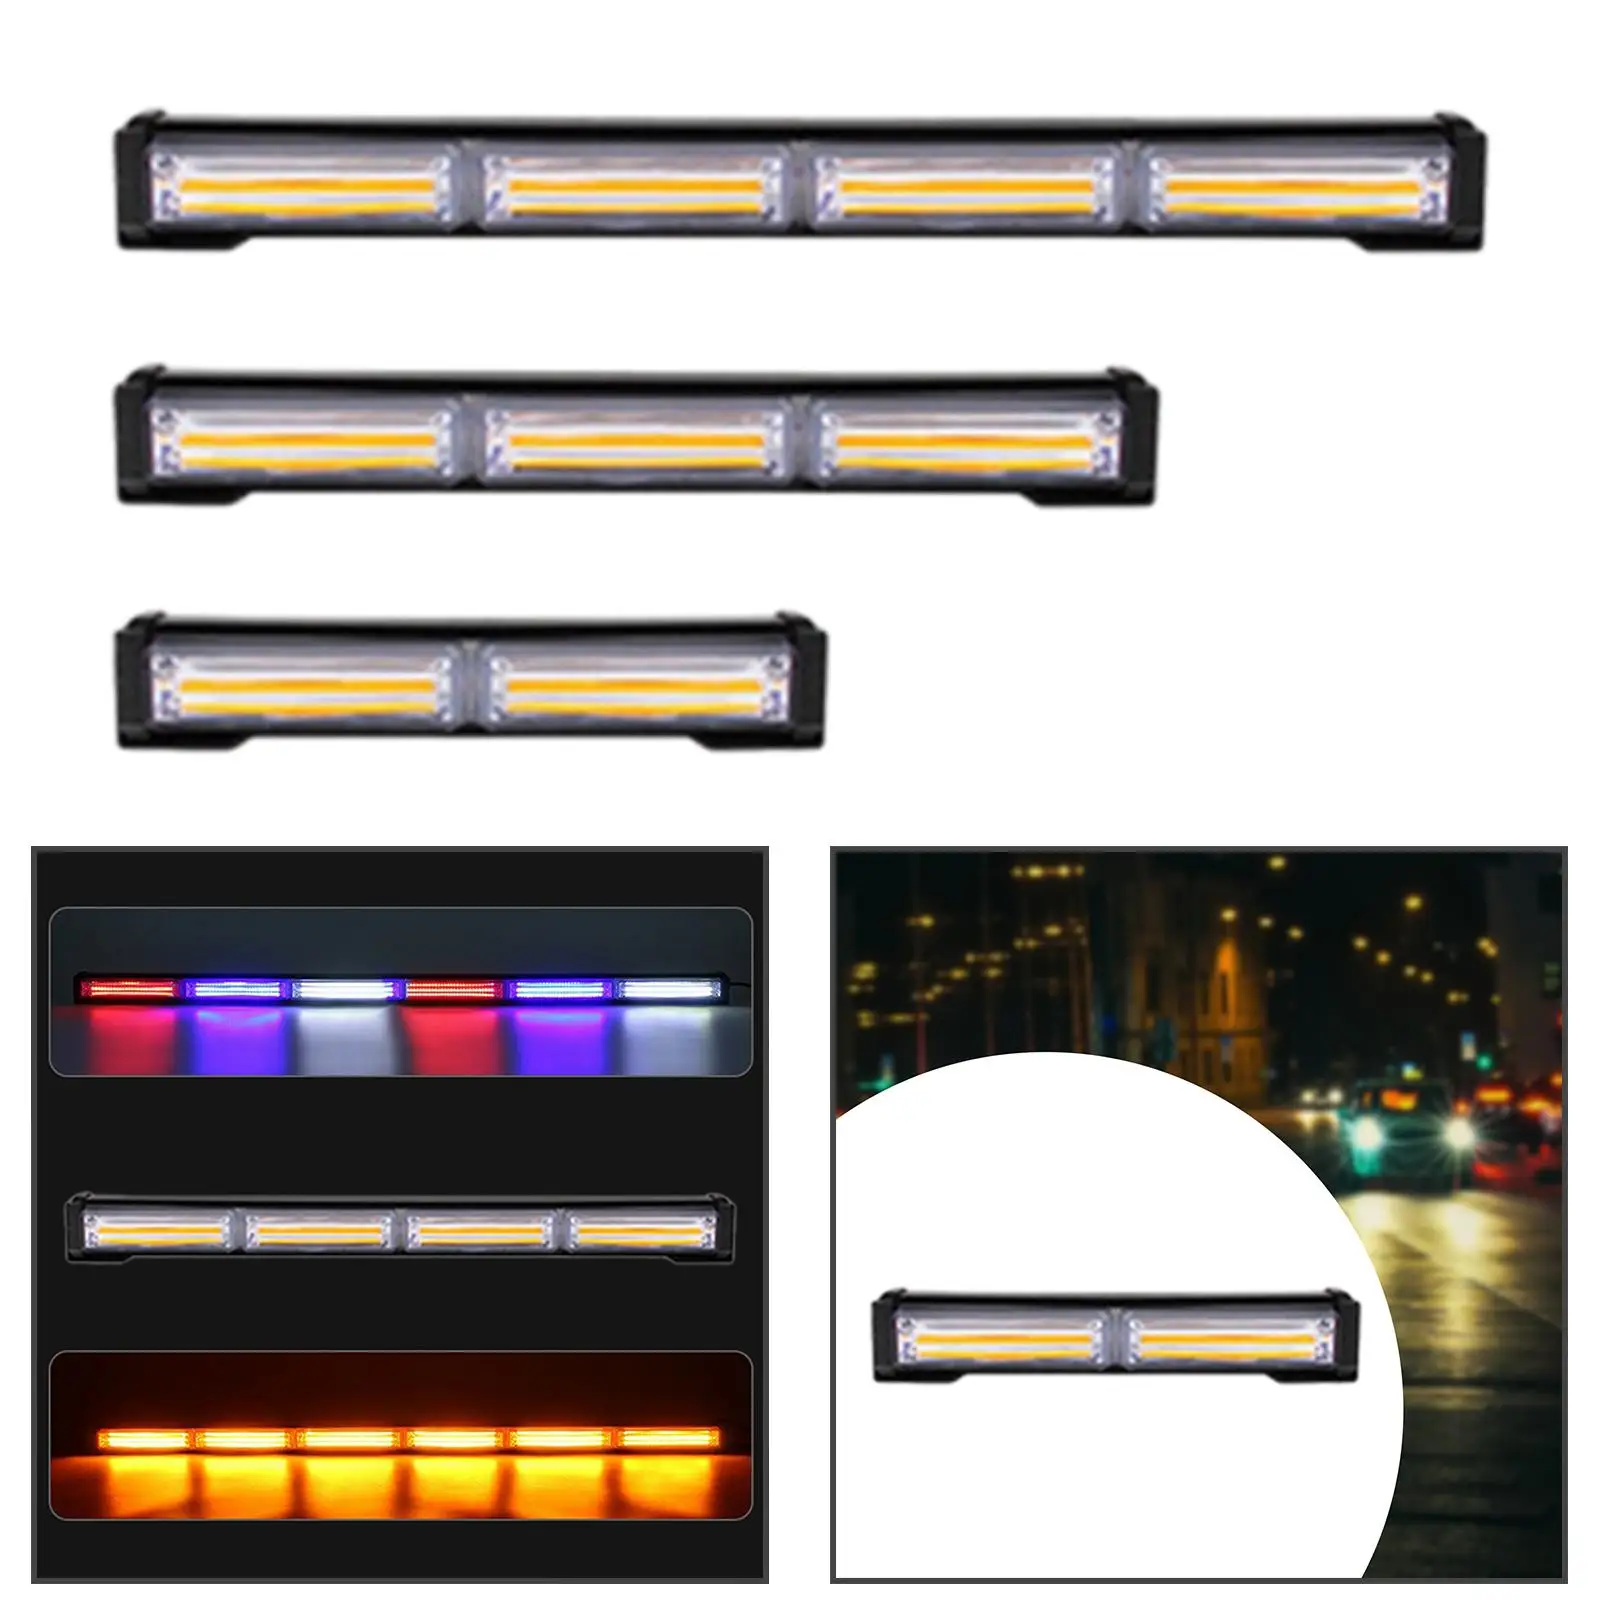 LED Strobe Flashing Light Bar High Intensity Universal Generic for Truck Vehicle Car Trailer Roof Off Road Vehicle